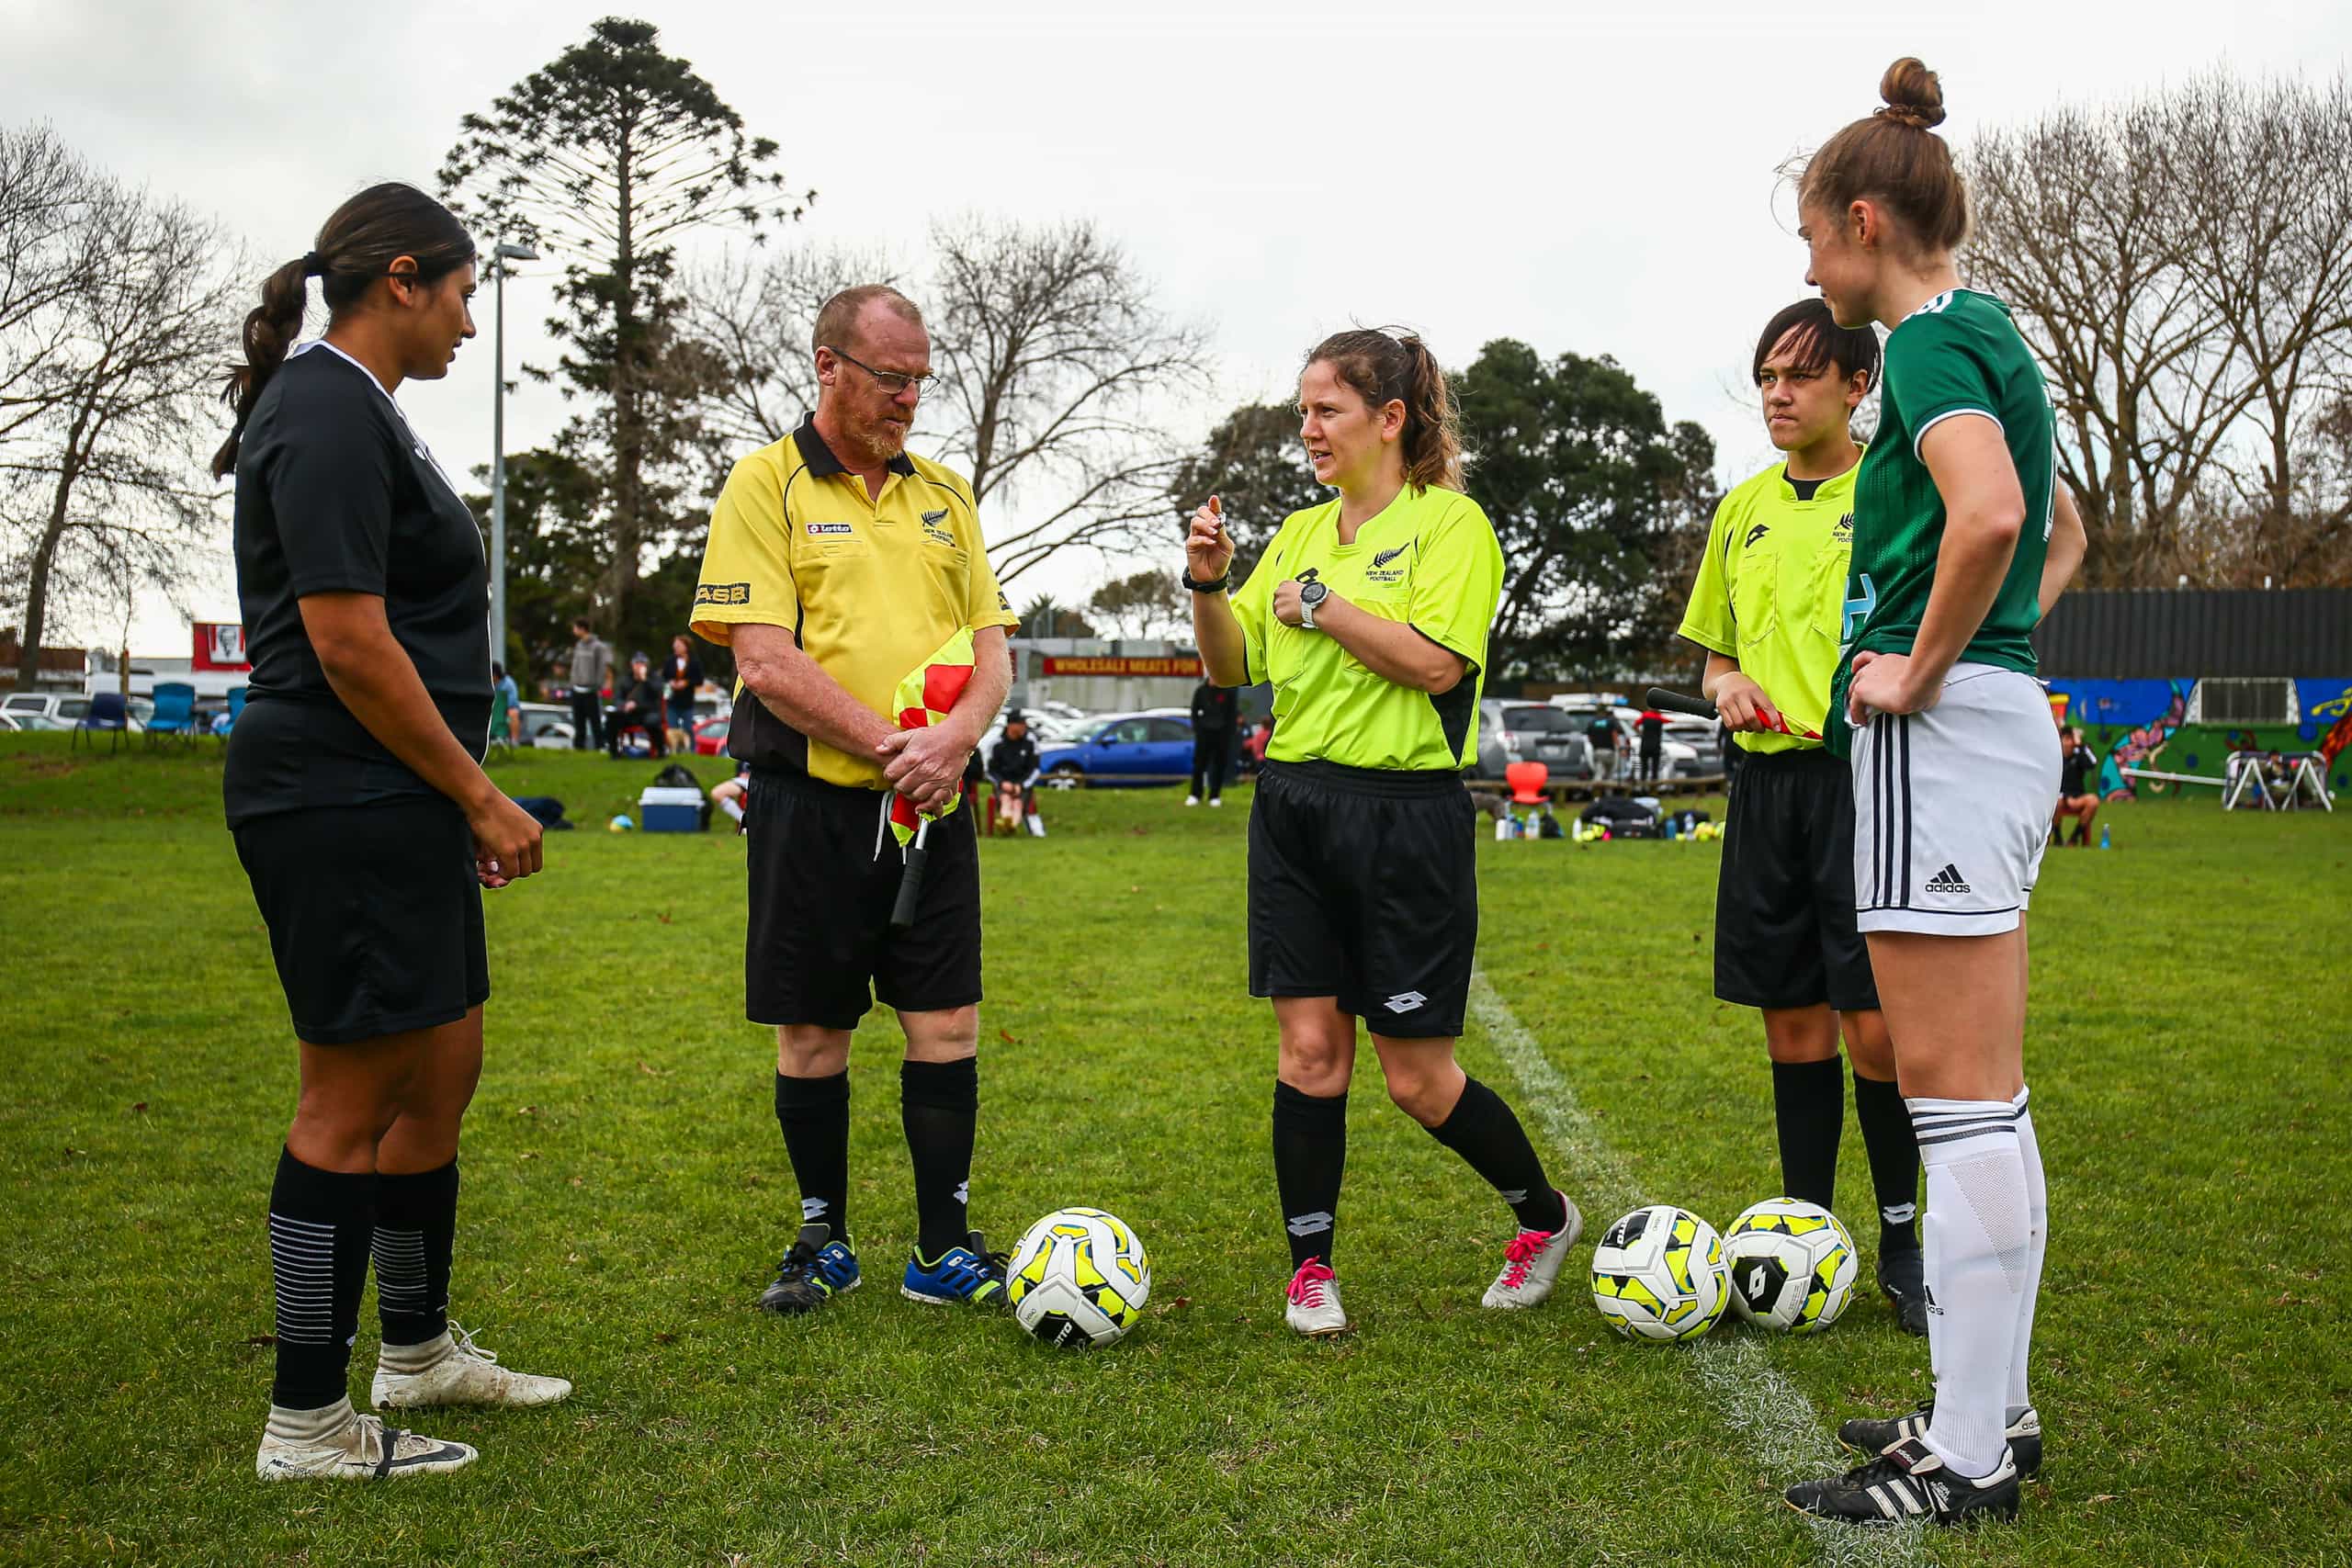 Manukau united Captain Jasleen Kaur, Onehunga Sports Captain Hannah Carter and Referee Tiffany Kawana-Waugh[C] Assistant Phillip Parks [L] and assistant Grace Parks [R] during the coin toss, LOTTO NRFL Womens Championship 2023, Manukau United v Onehunga Sports, Walter Massey Park, Auckland, Sunday 28th May 2023. Photo: Andrew Skinner / www.phototek.nz